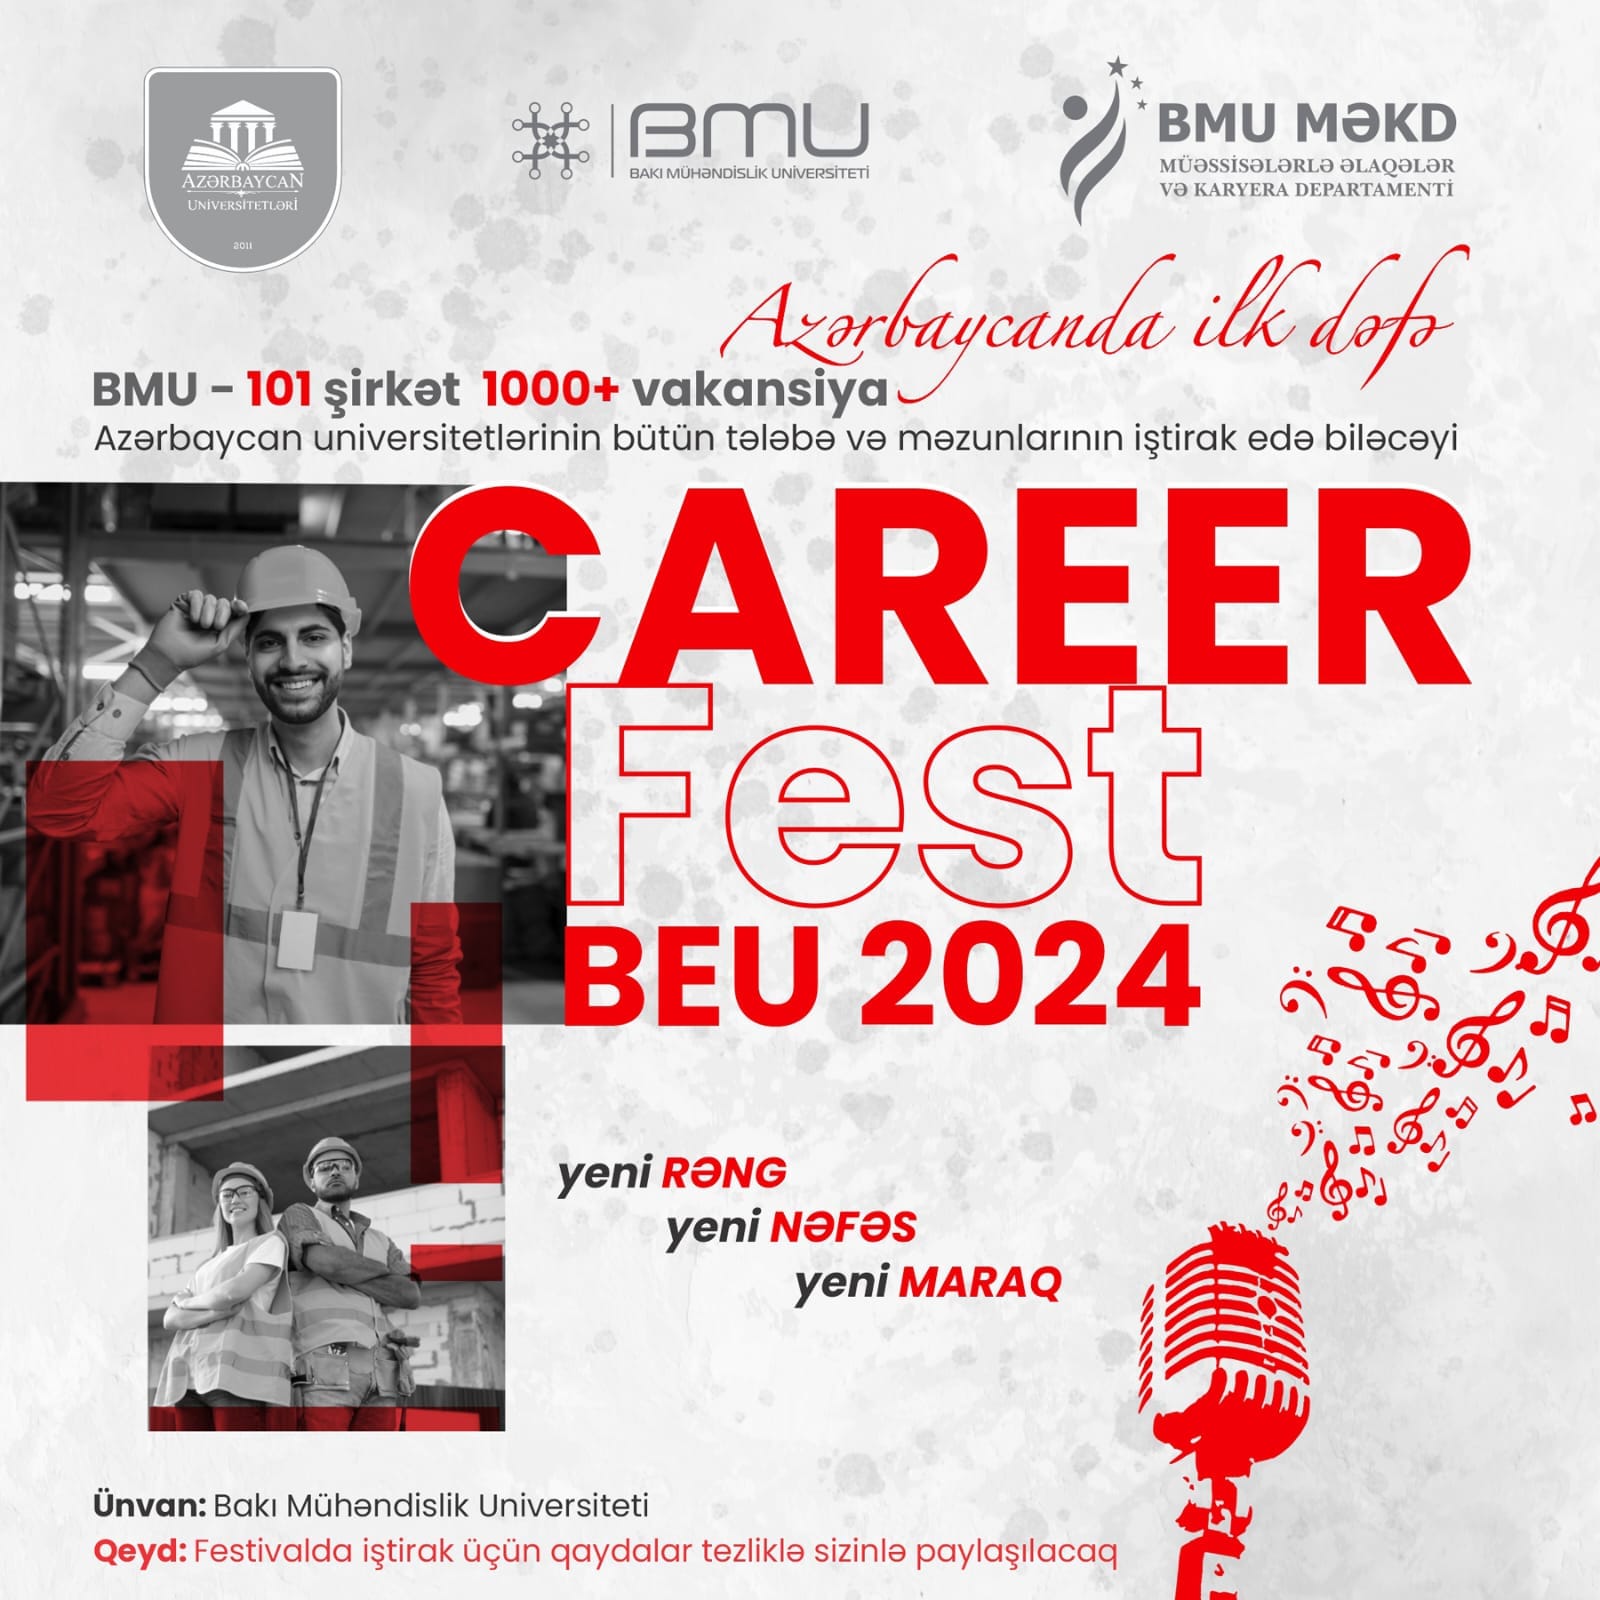 Festival for all students and graduates to  be held at BEU for the first time in Azerbaijan